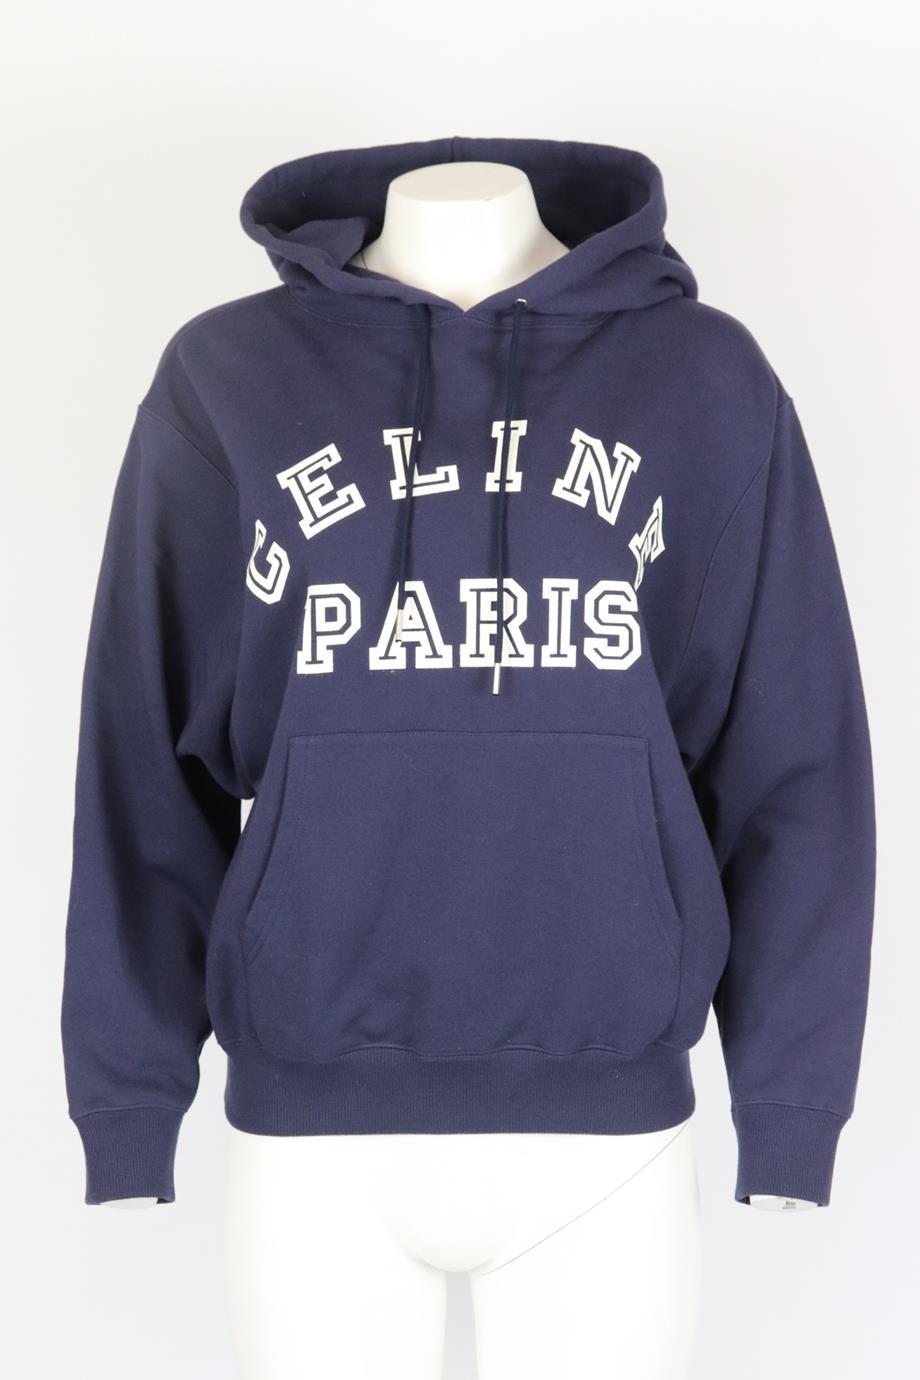 Celine logo printed cotton jersey hoodie. Navy and white. Long sleeve, crewneck. Slips on. 100% Cotton. Size: Small (UK 8, US 4, FR 36, IT 40). Bust: 41 in. Waist: 38.4 in. Hips: 34 in. Length: 24 in. Very good condition - As new condition, no sign